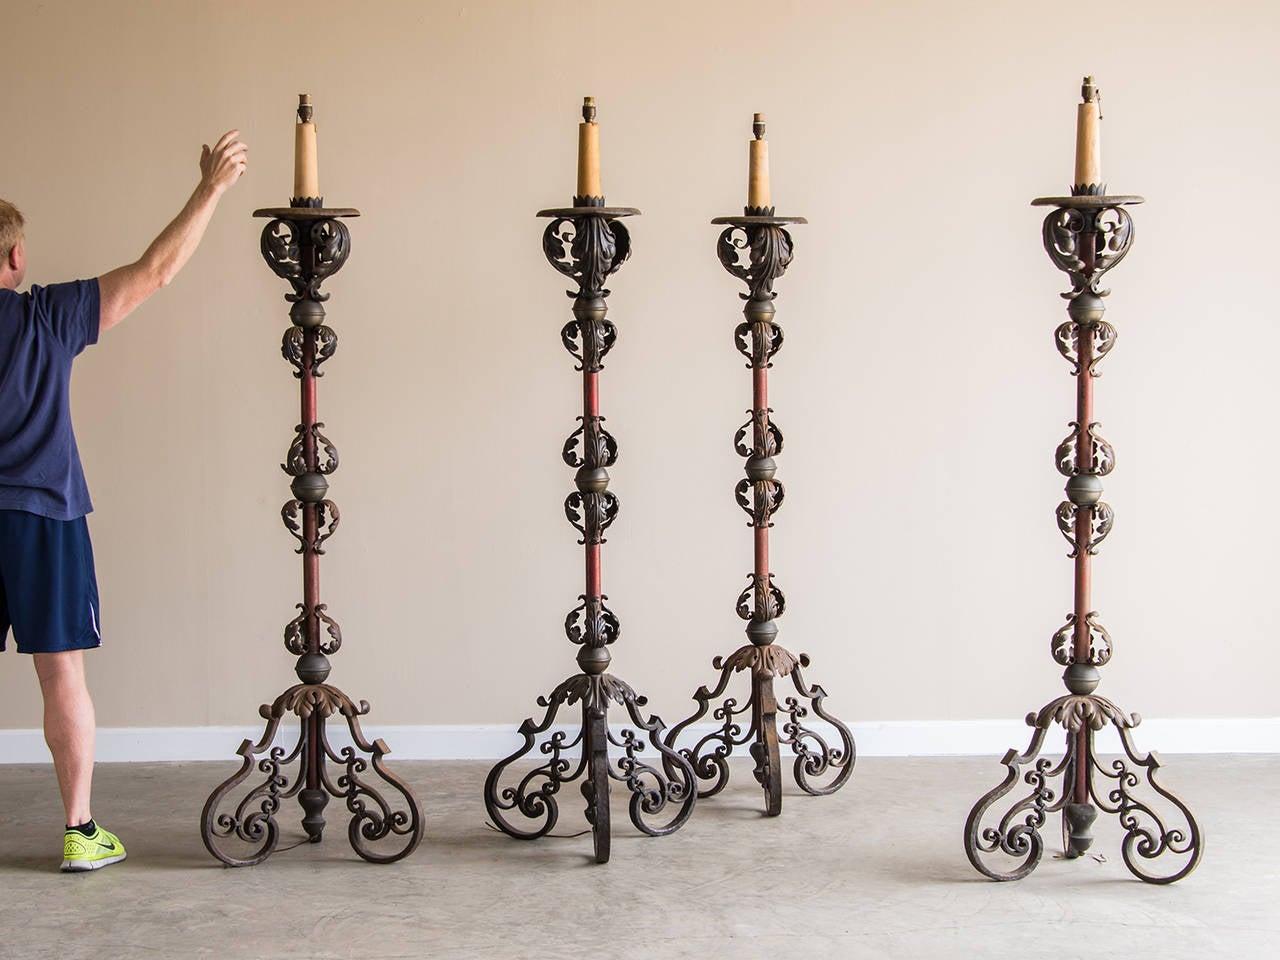 Receive our new selections direct from 1stdibs by email each week. Please click Follow Dealer below and see them first!

These extraordinary antique French candle stands circa 1880 are life size (the man in the photograph is 5'9